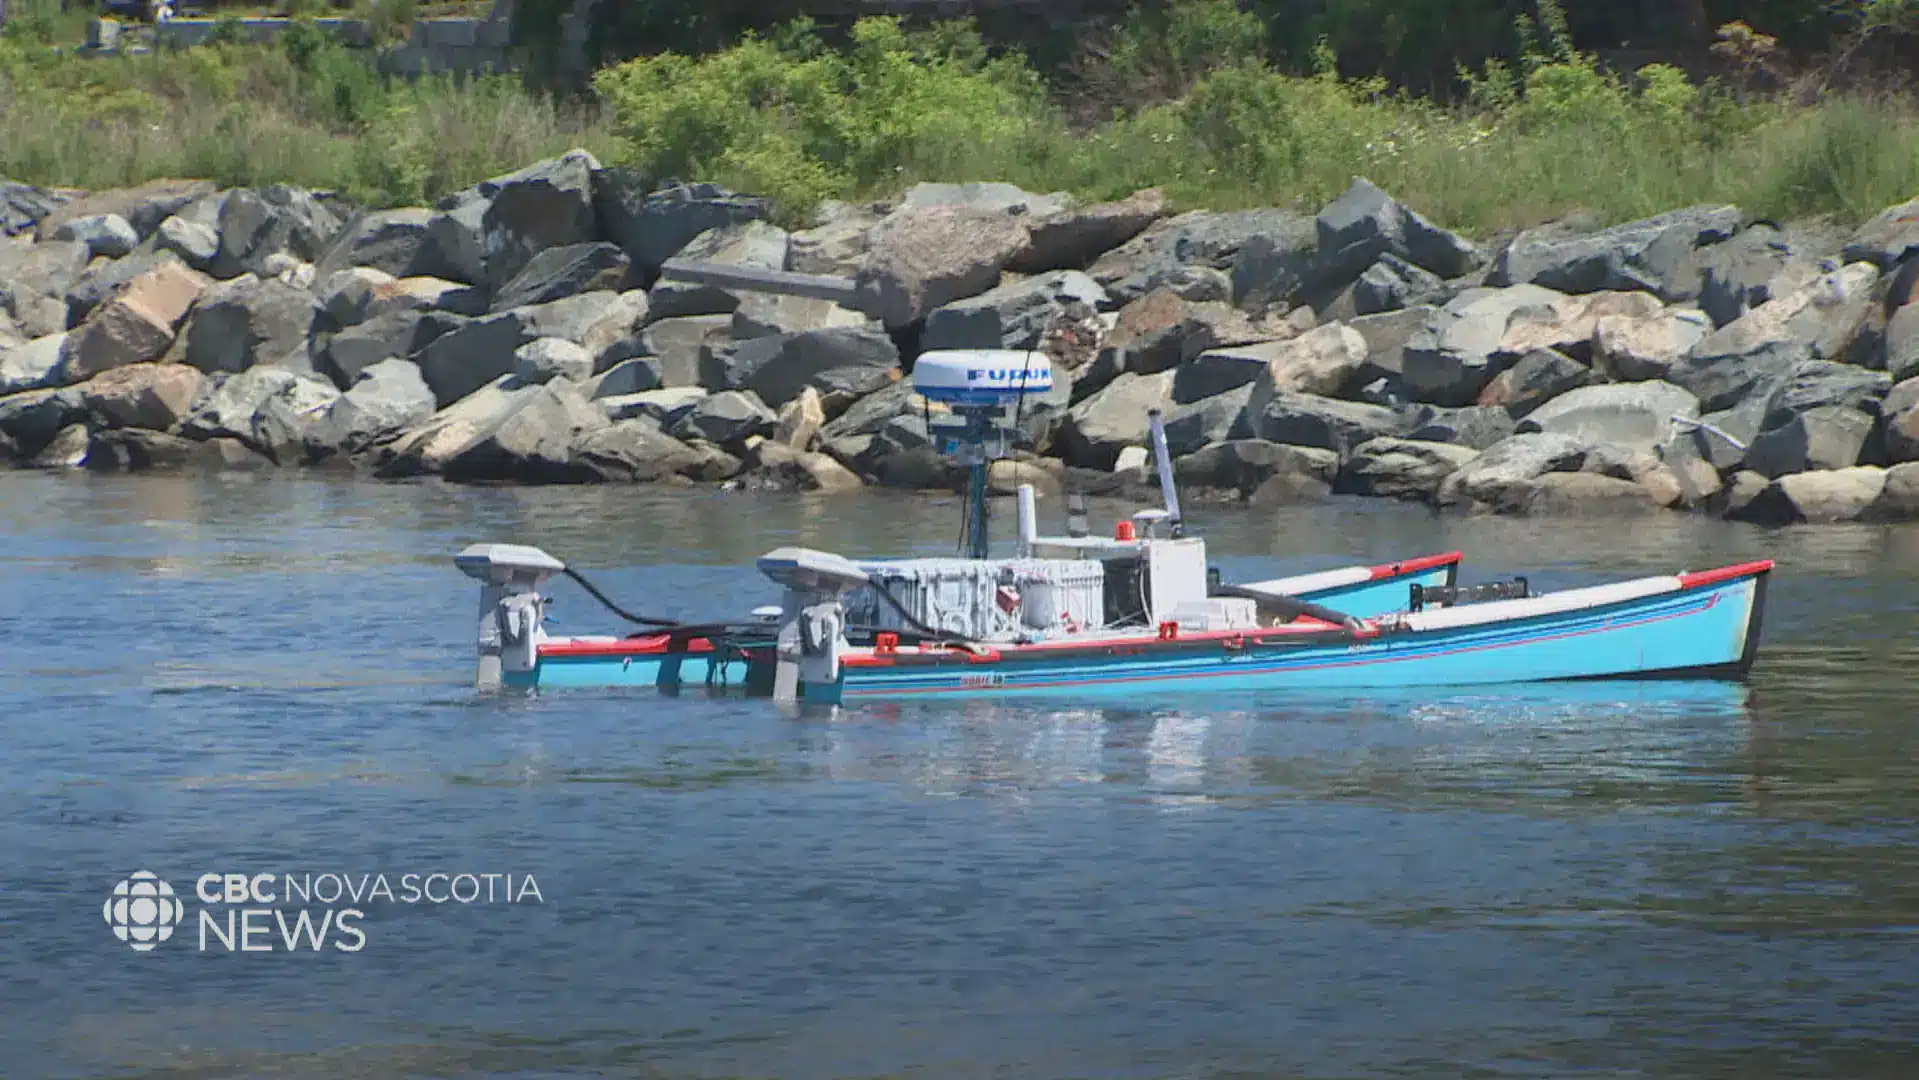 Latest in ocean technology draws a crowd in Dartmouth